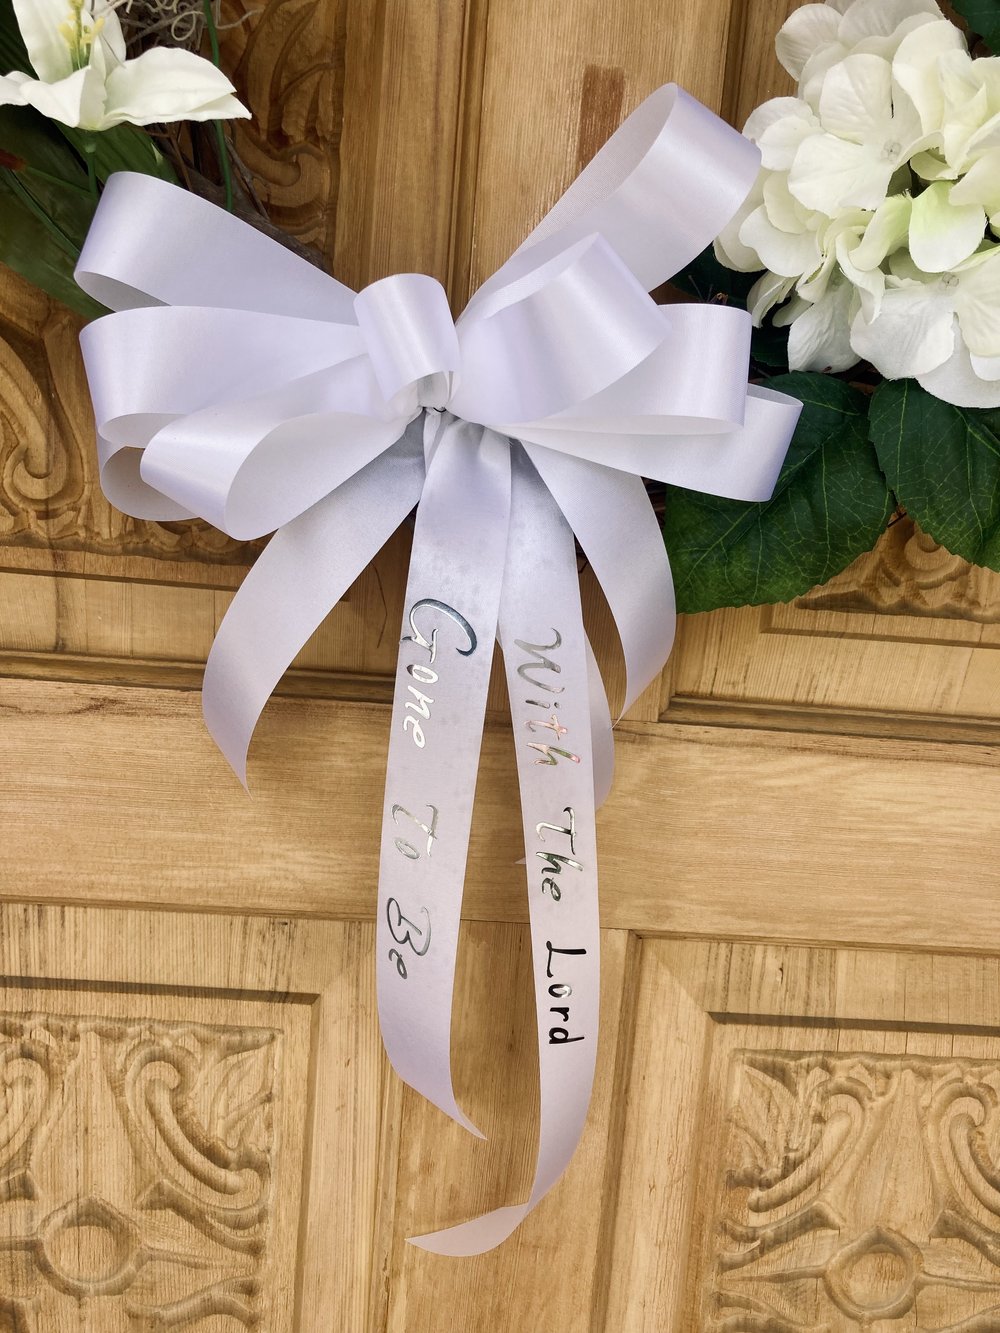 Personalized ribbons for flower bouquets 💐💖 𝘳𝘢𝘮𝘰 𝘮𝘢𝘥𝘦 𝘣𝘺 @, Ribbon Bouquet